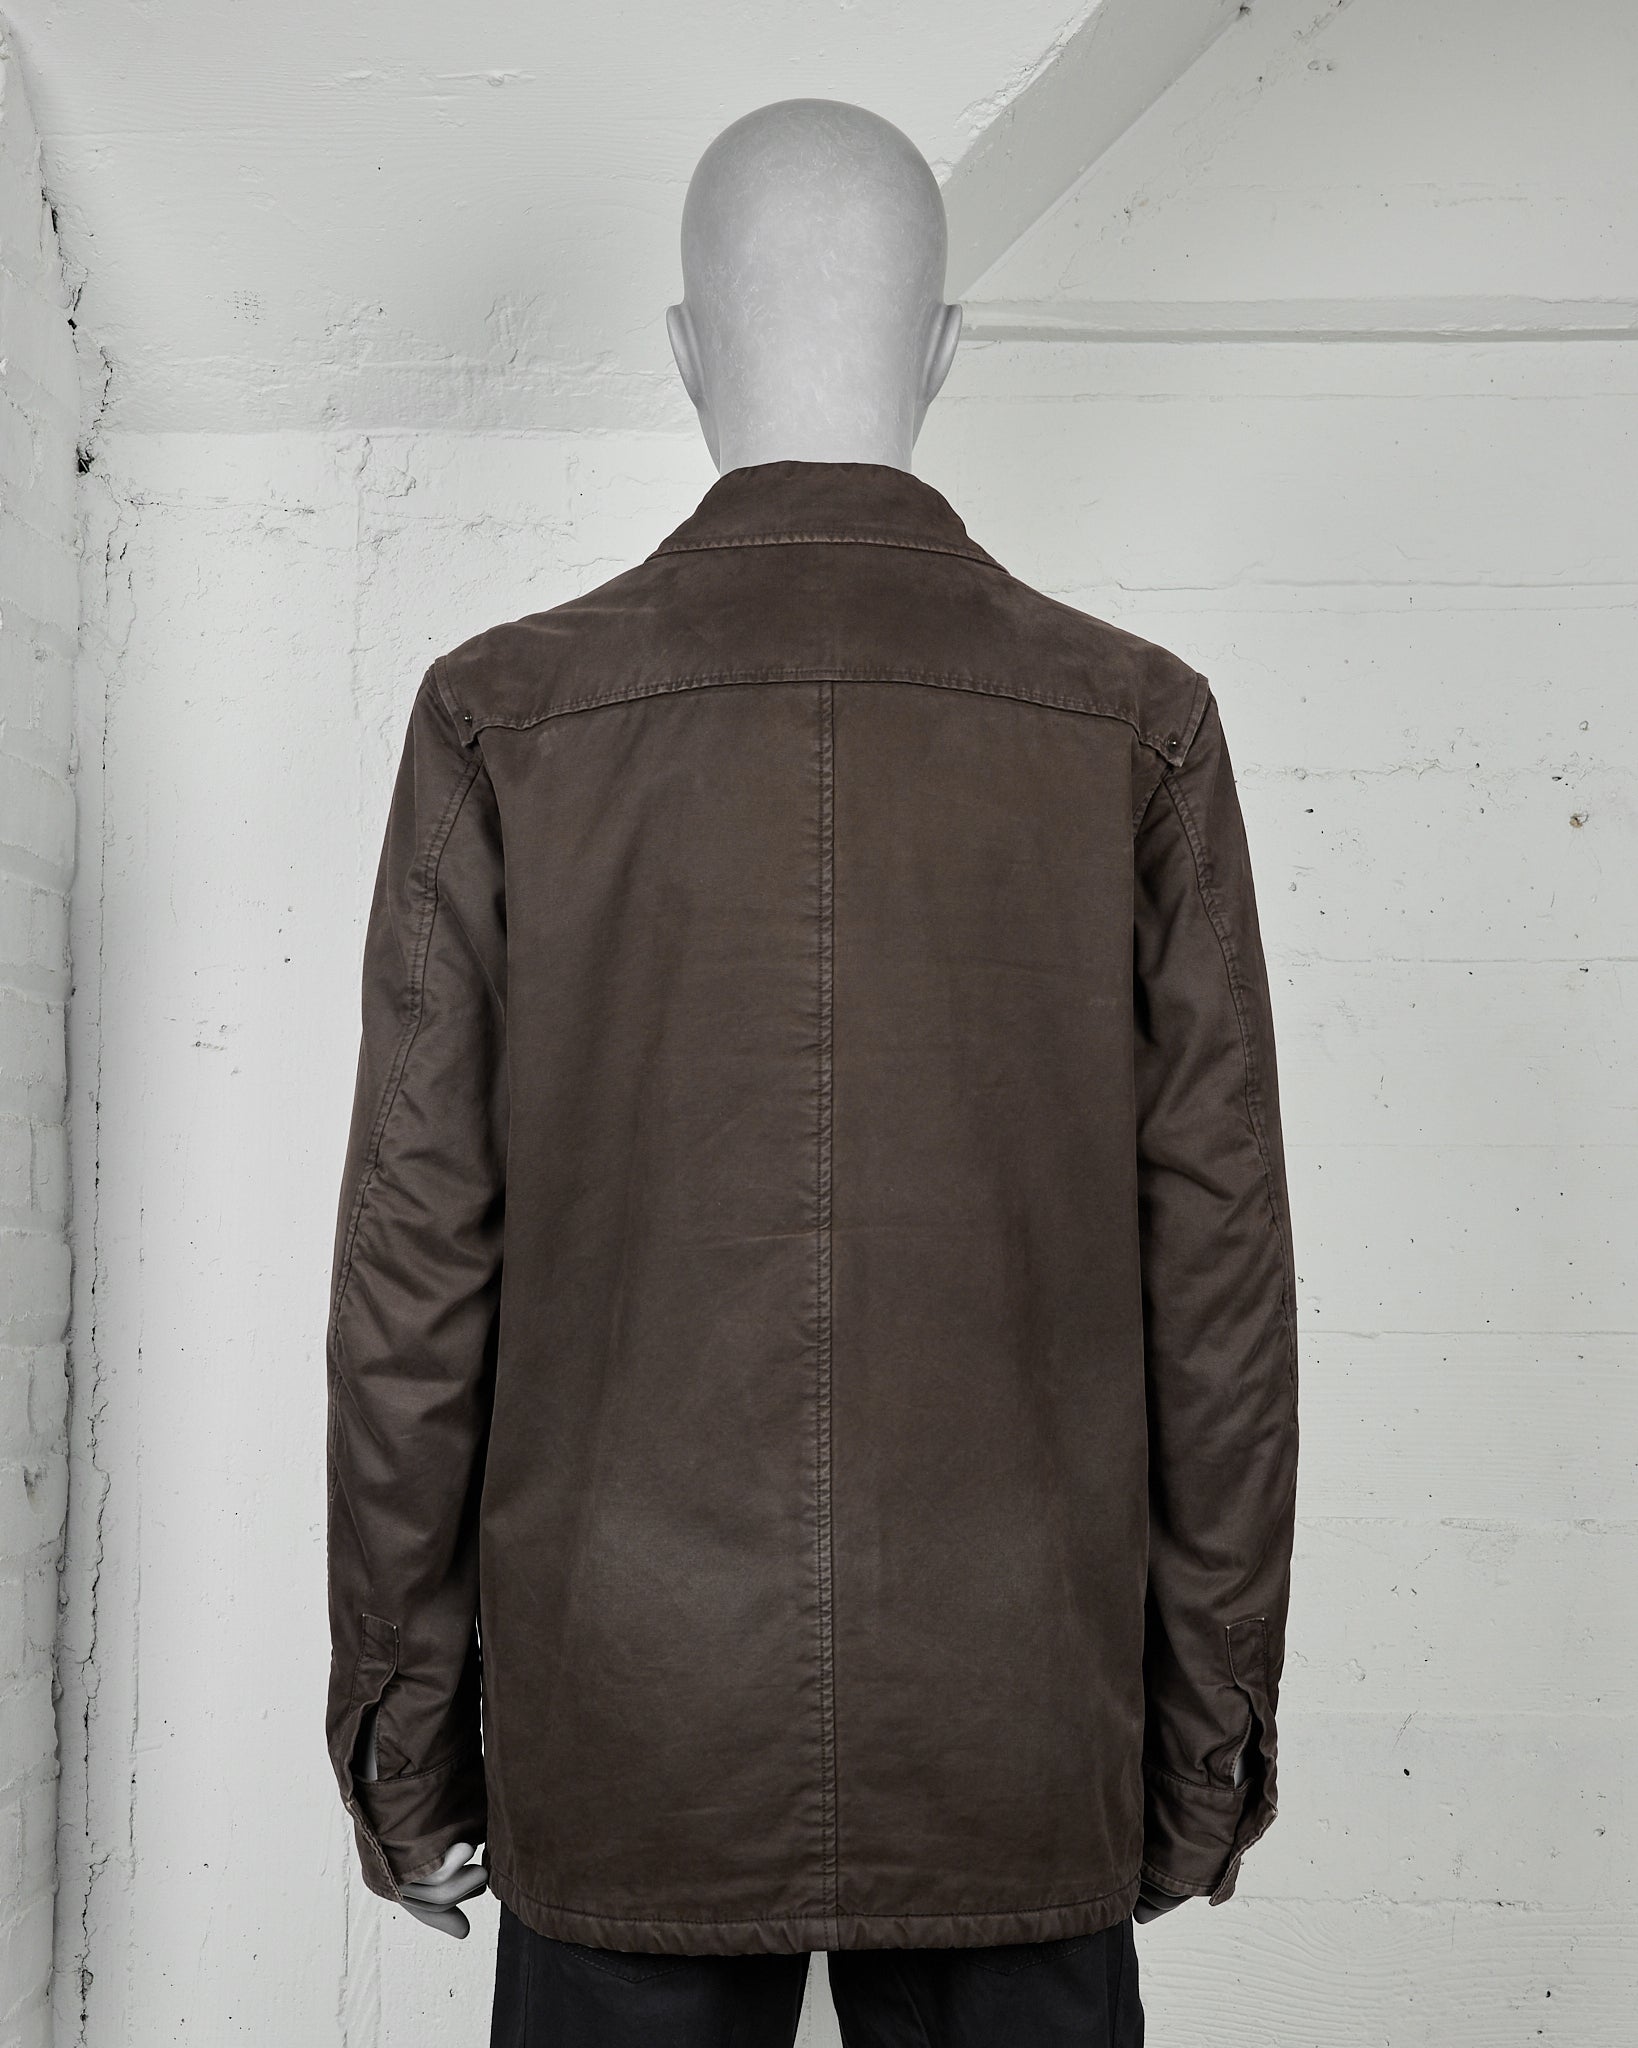 Hussein Chalayan Brown Field Jacket - AW05 "In Shadows" back photo